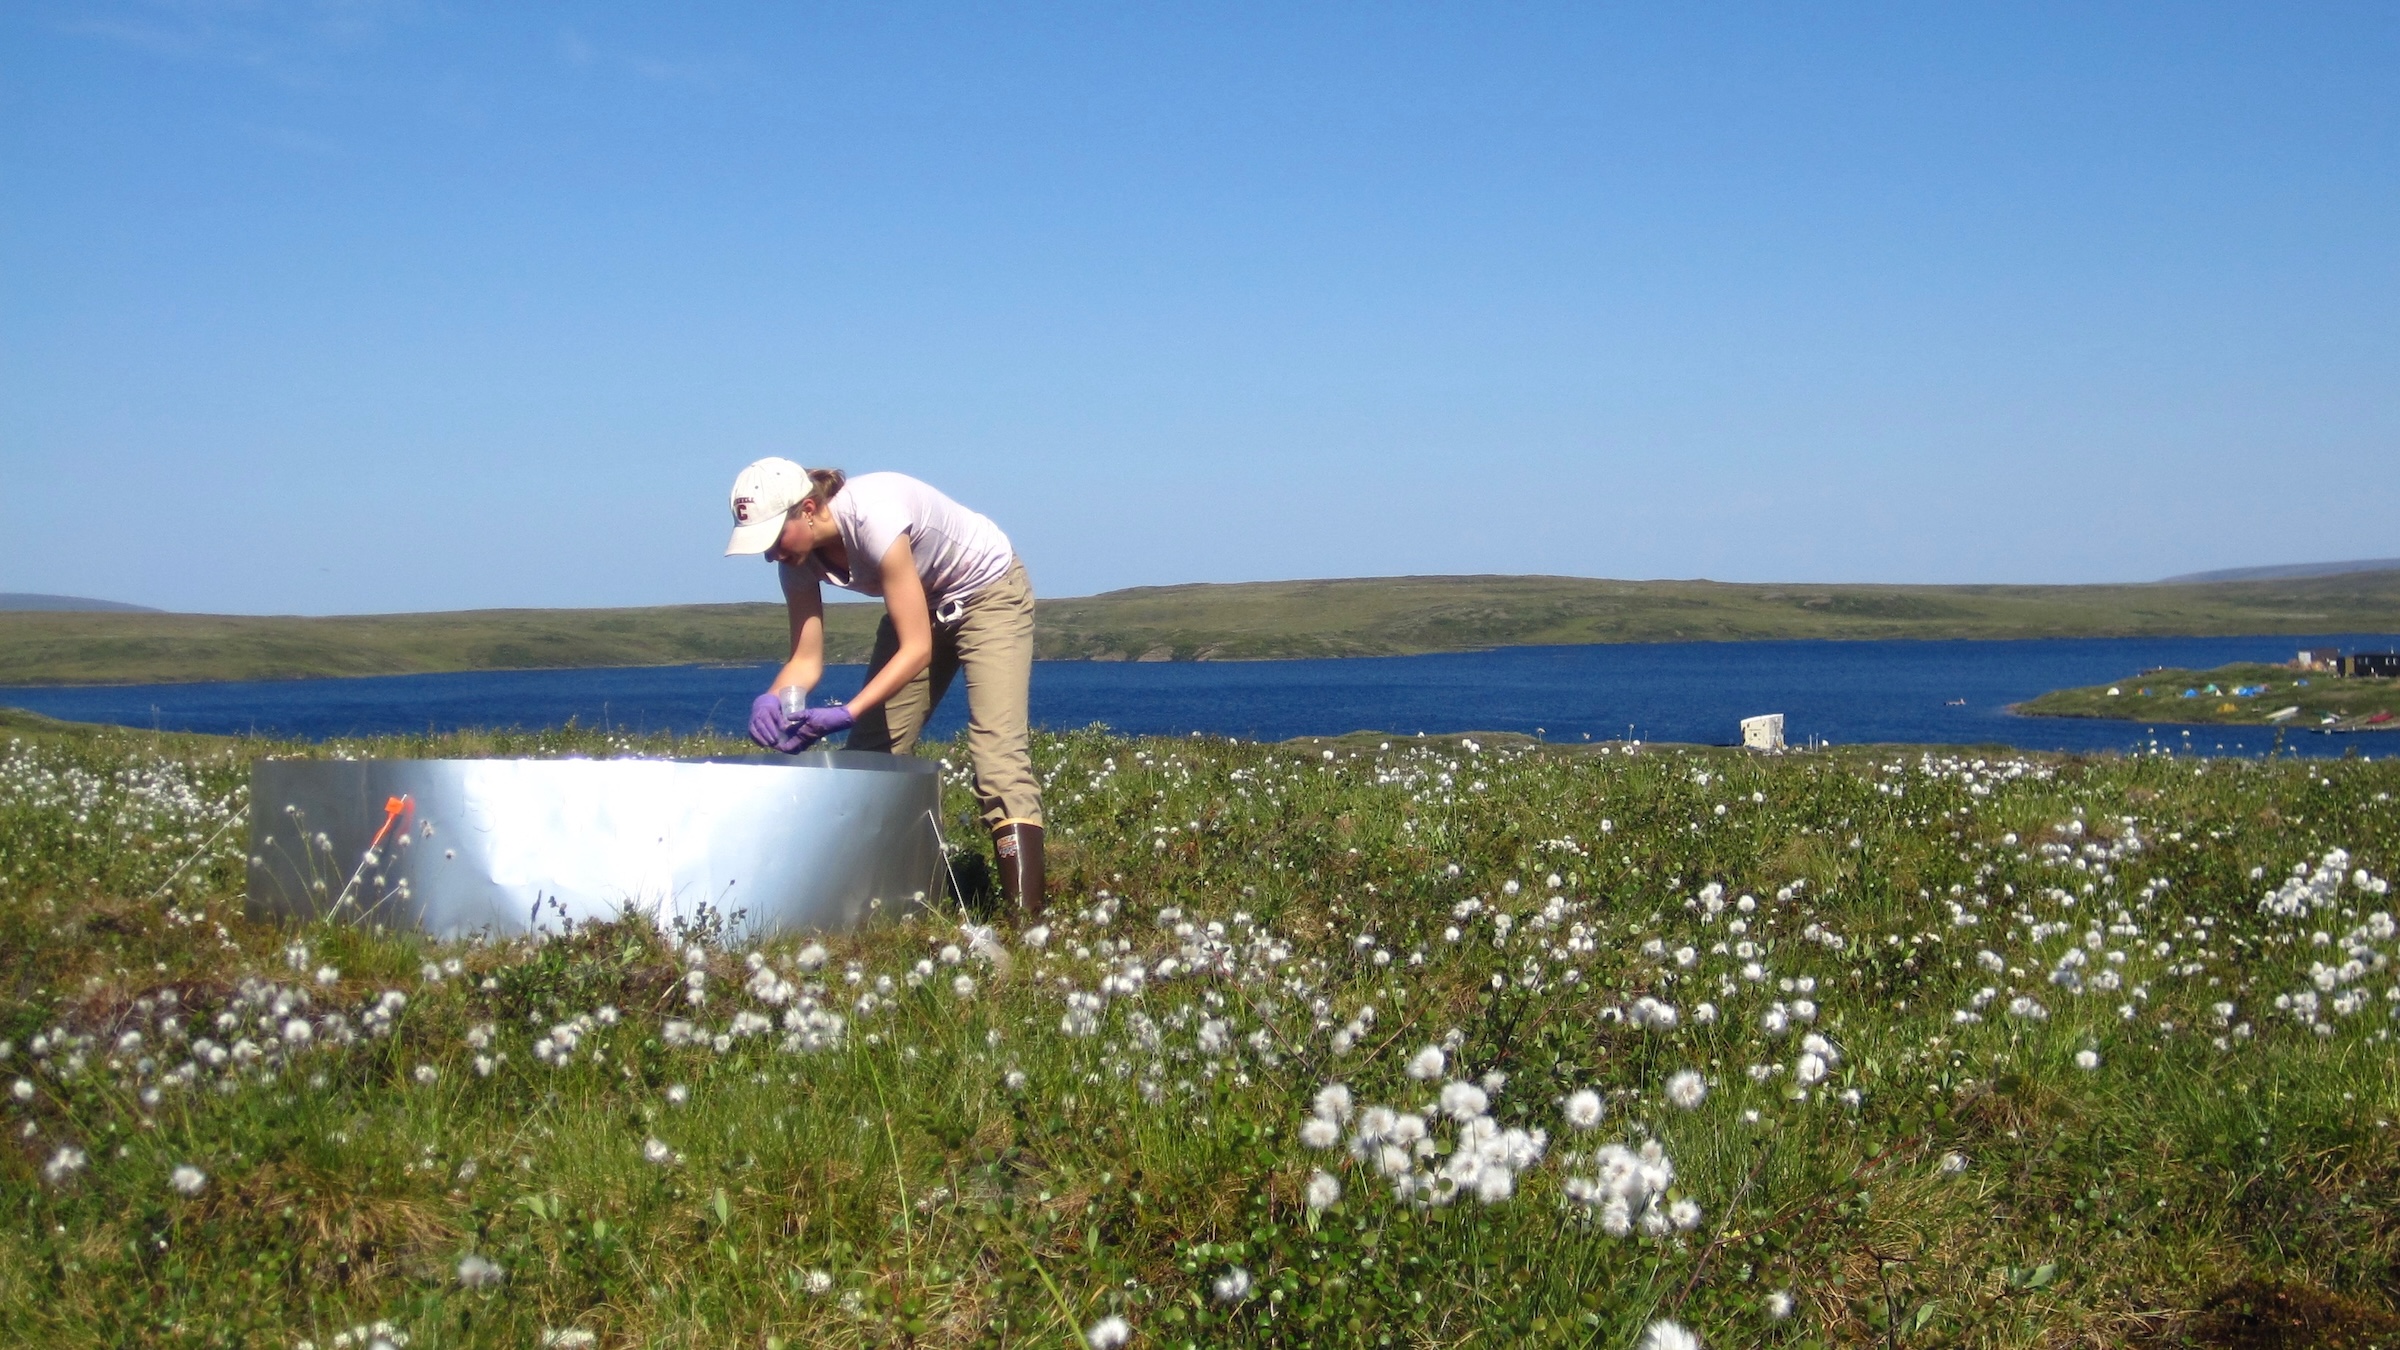 A scientist in a cap, t-shirt and long pants stands in a meadow area near a lake and hills examining results within a tin container